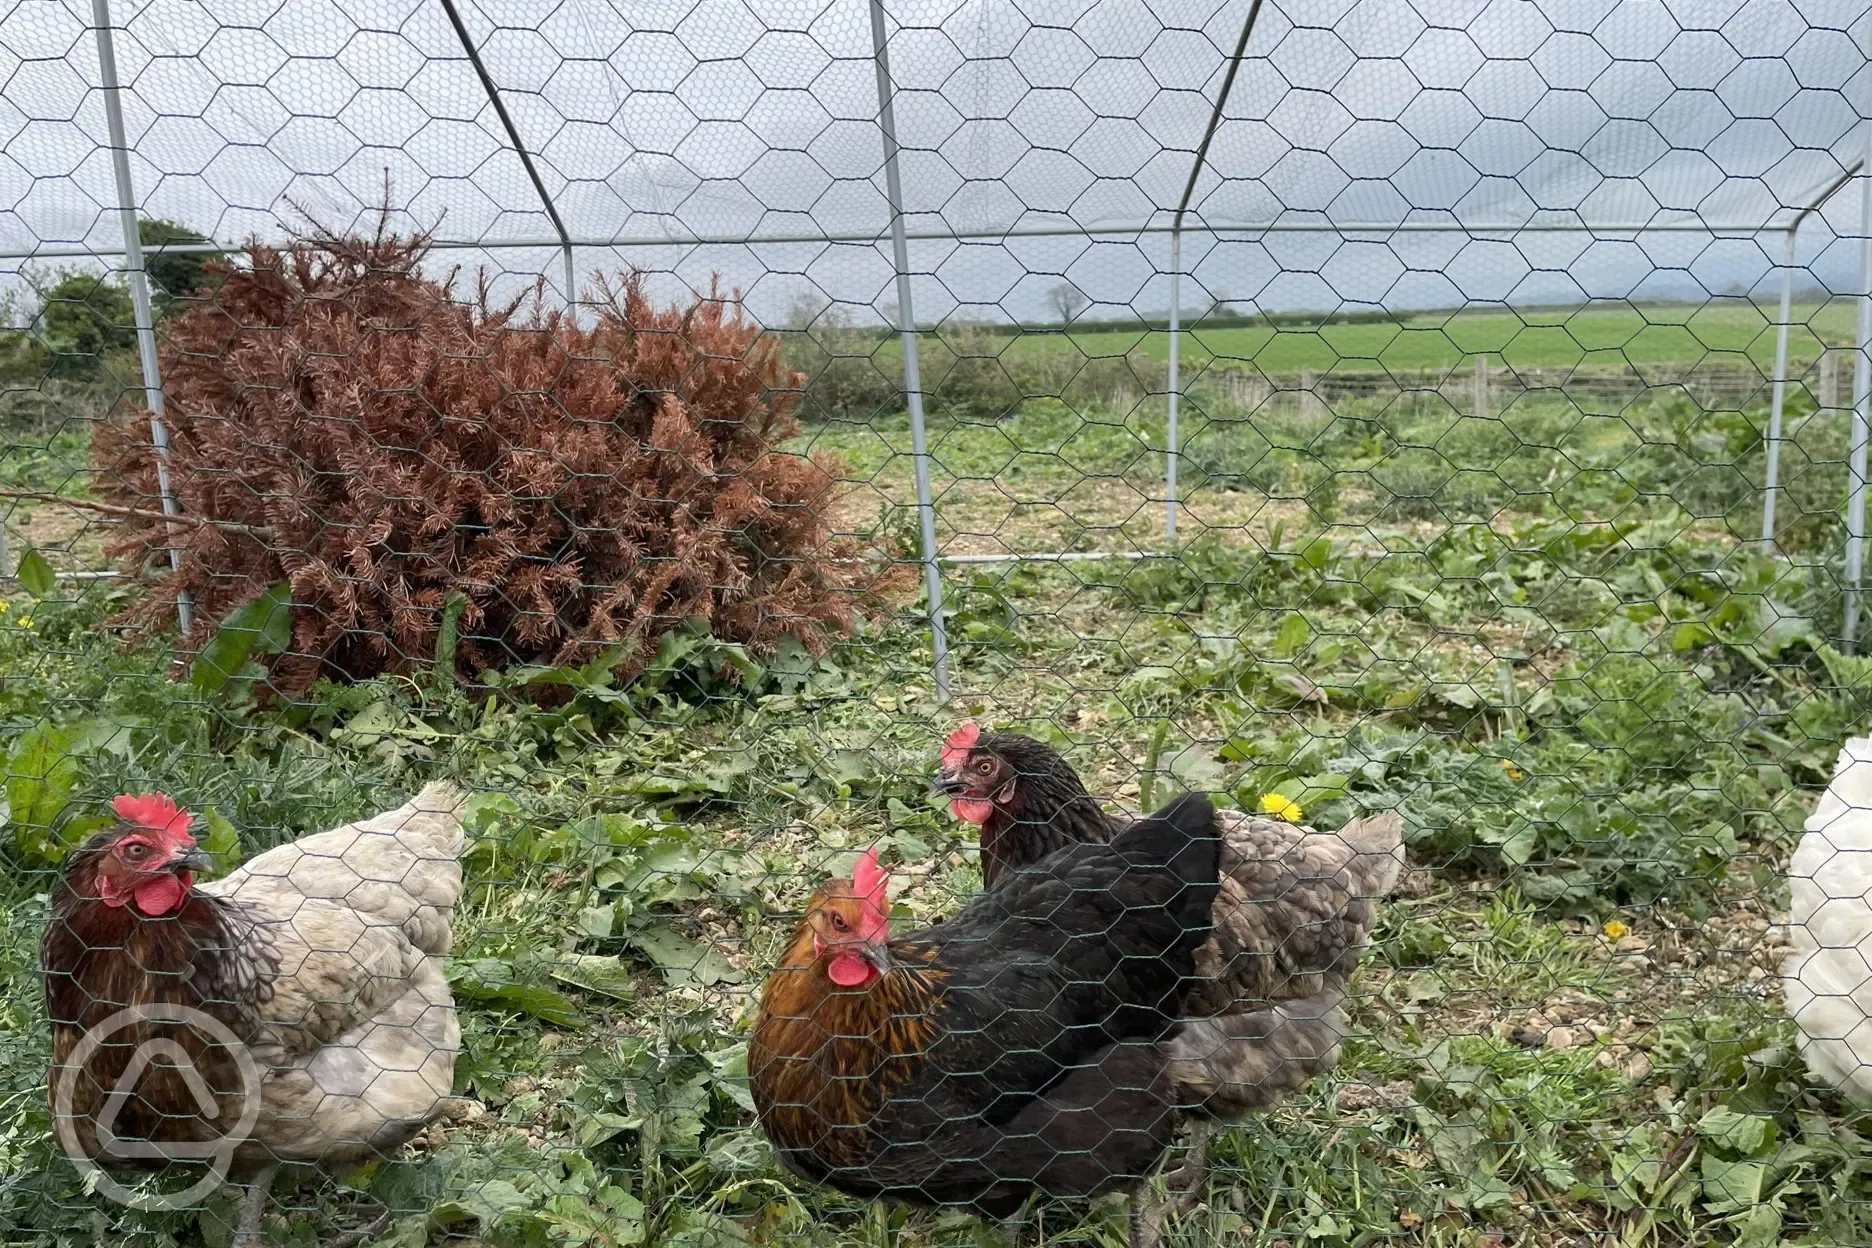 Resident chickens